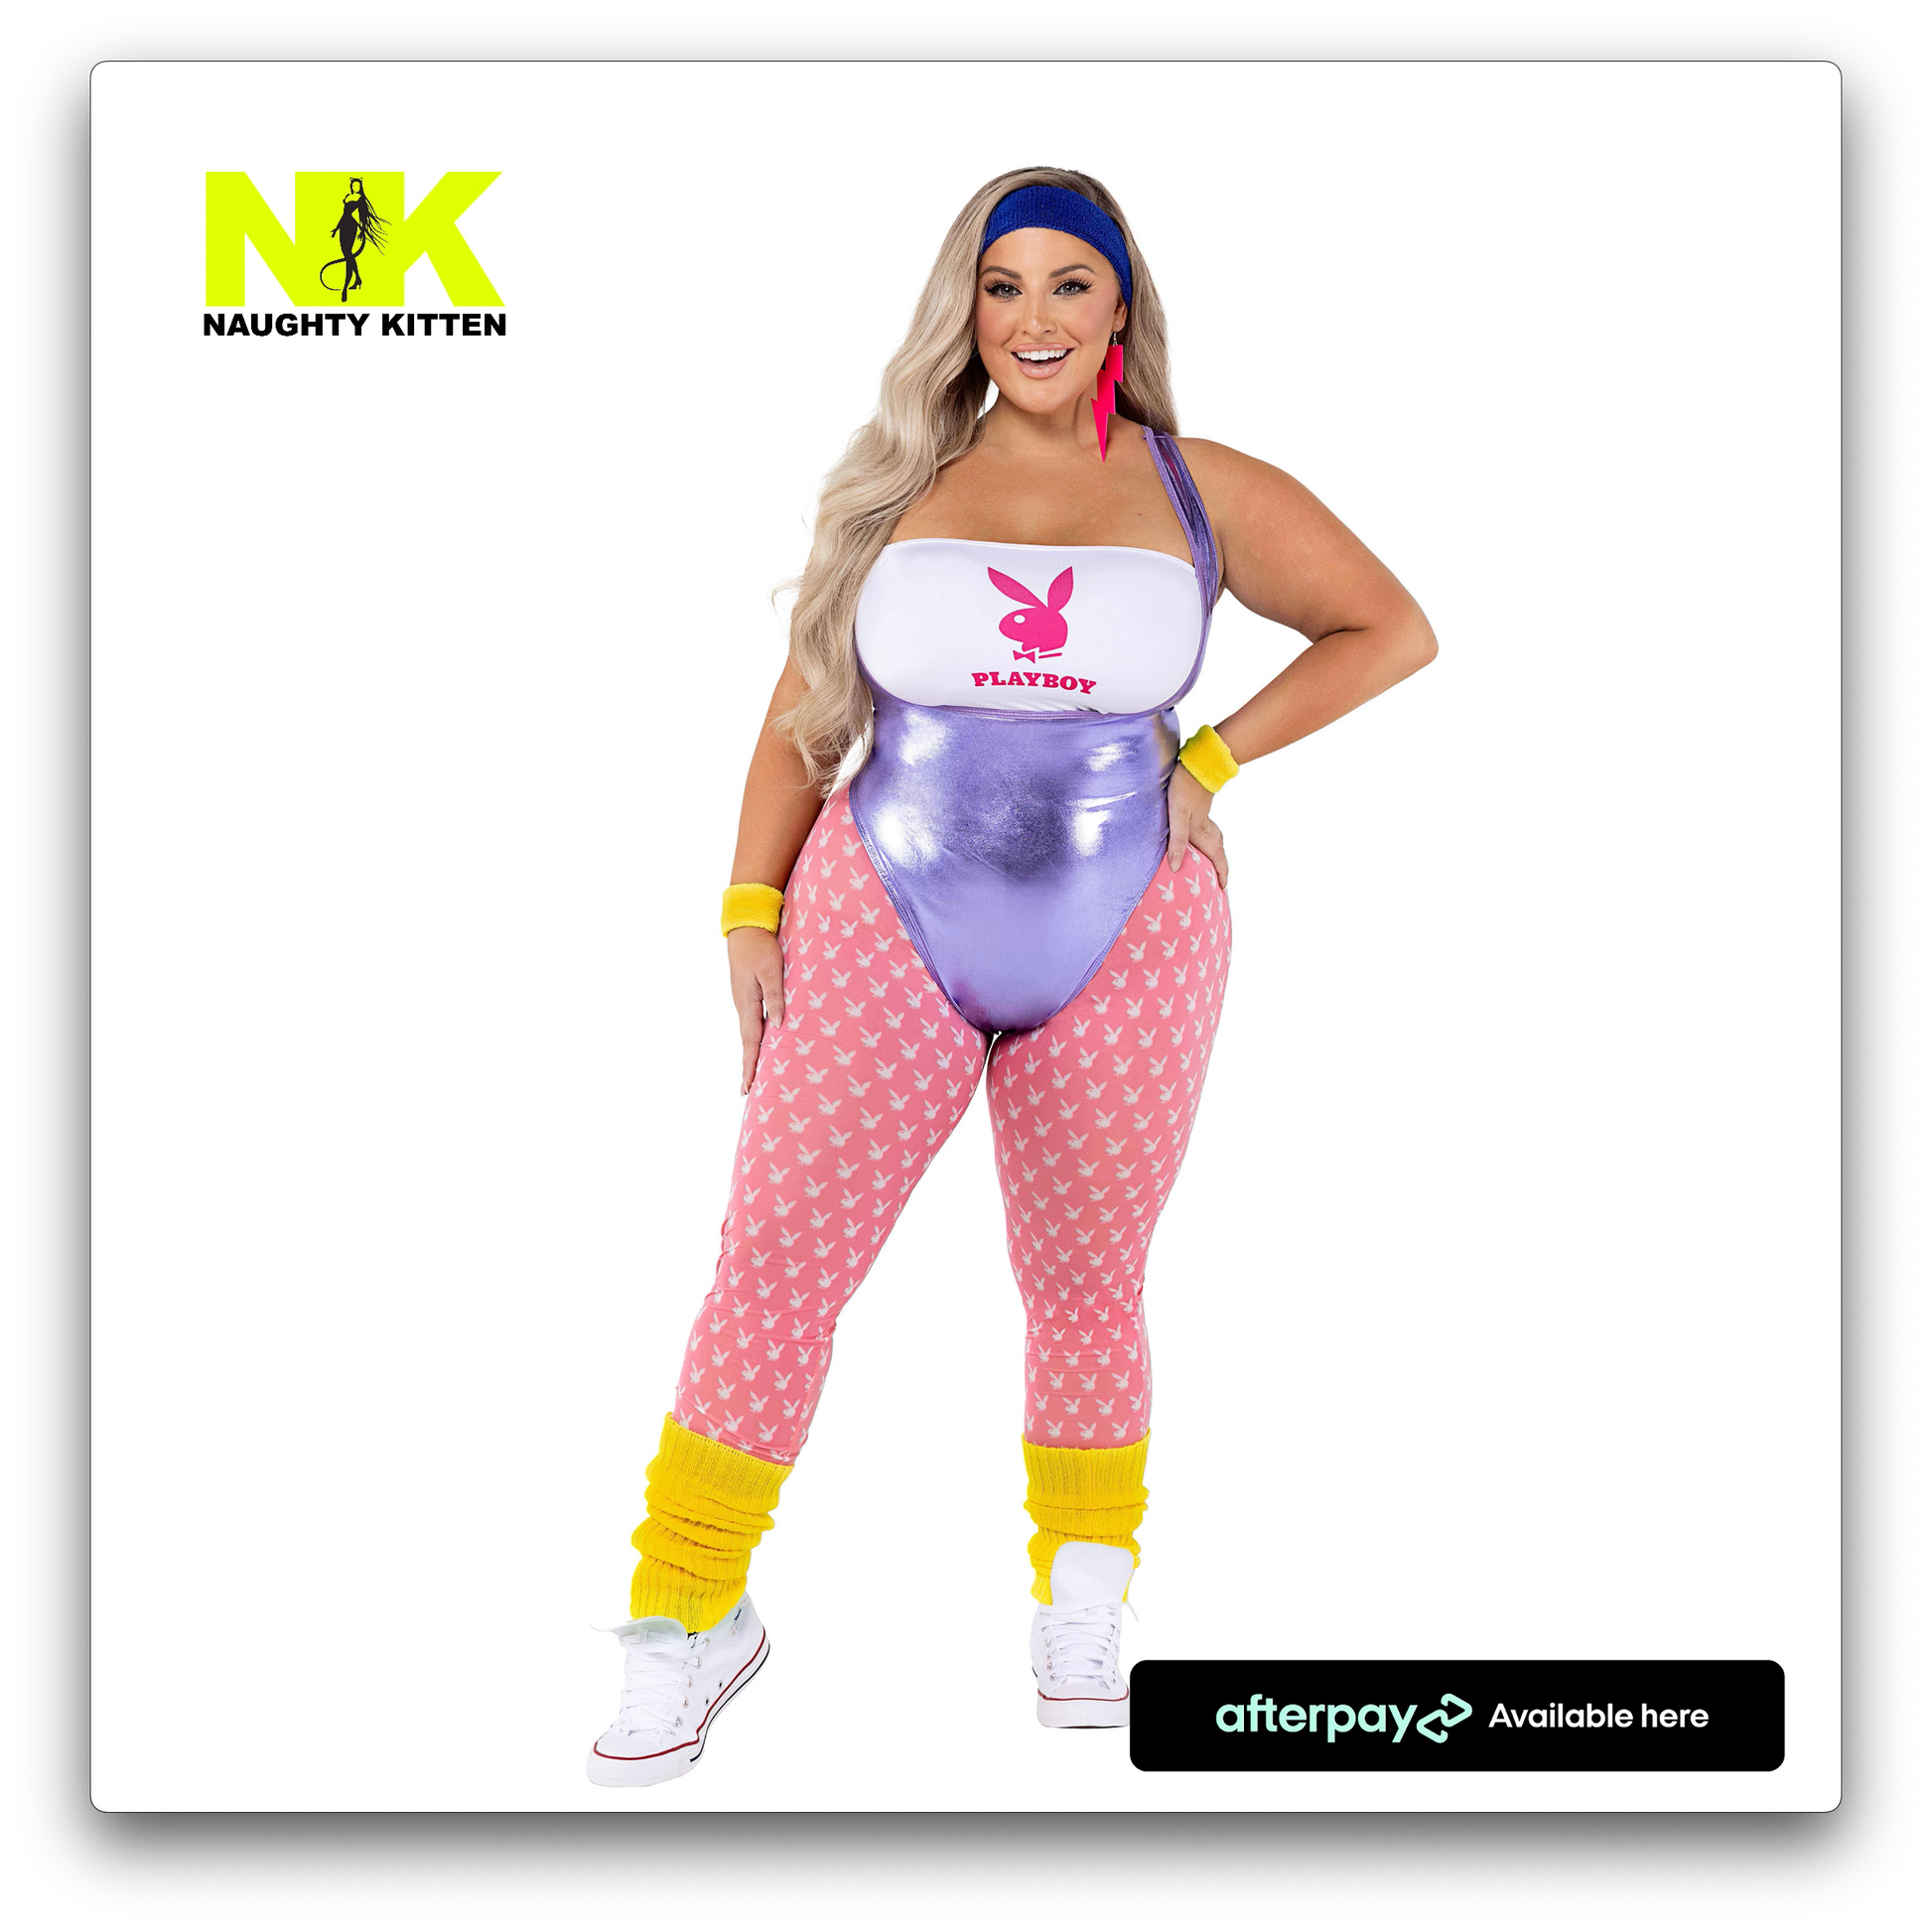 Naughty Kitten Clothing Playboy 80's Fitness Costume Front View Playboy Costume Plus Size